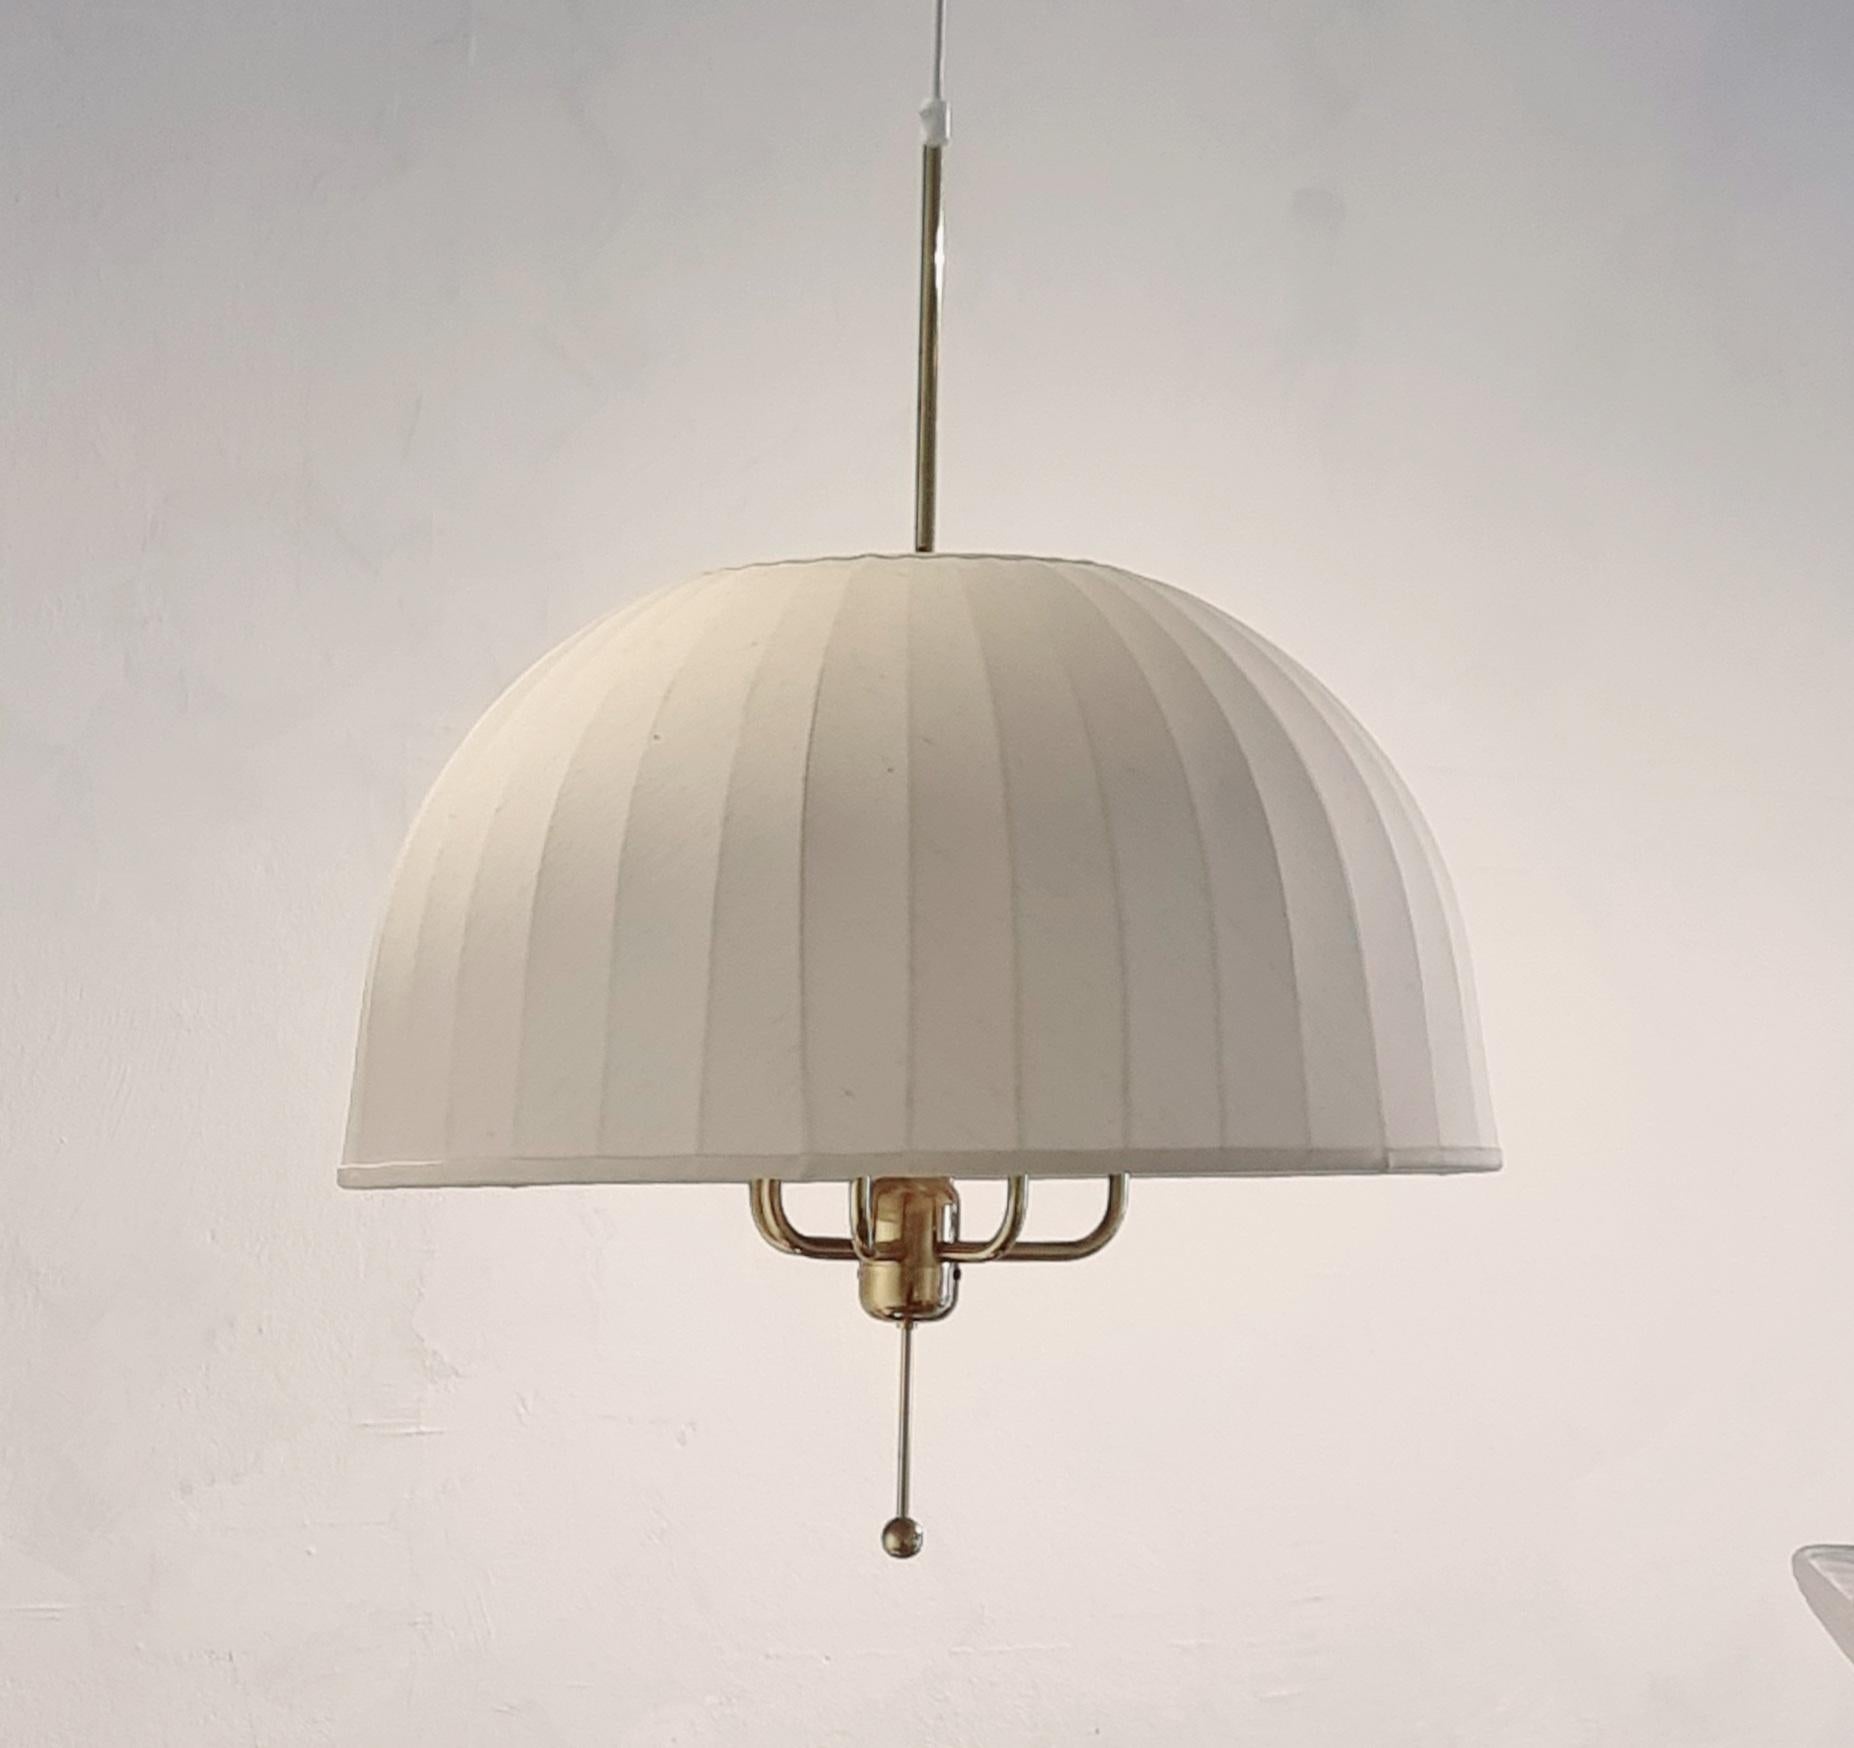 Large, six-armed Scandinavian Modern pendant lamp, Model “T549/6” Carolin, designed by Hans Agne Jakobsson and produced by AB Markaryd in the 1960s.

Frame in brass and the shade in the original off-white fabric. 
Original label intact on shade. In